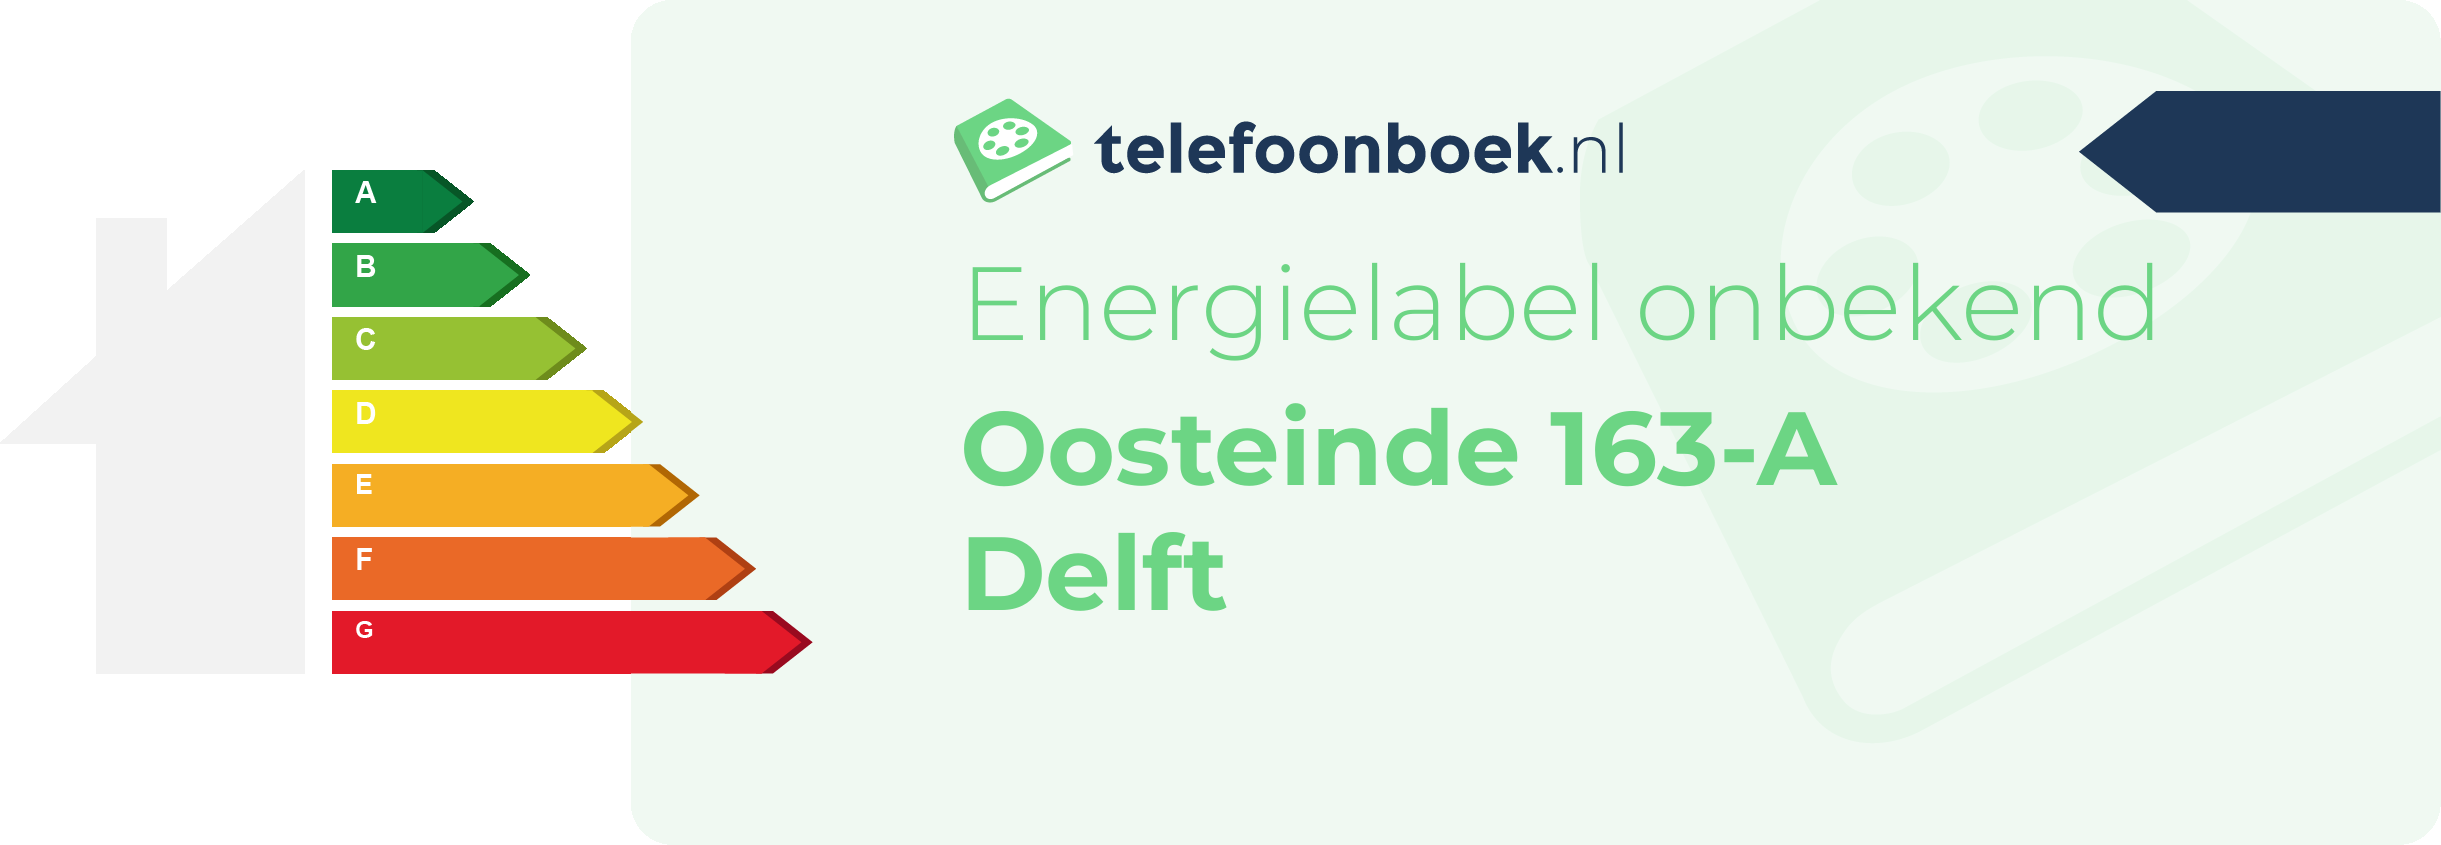 Energielabel Oosteinde 163-A Delft